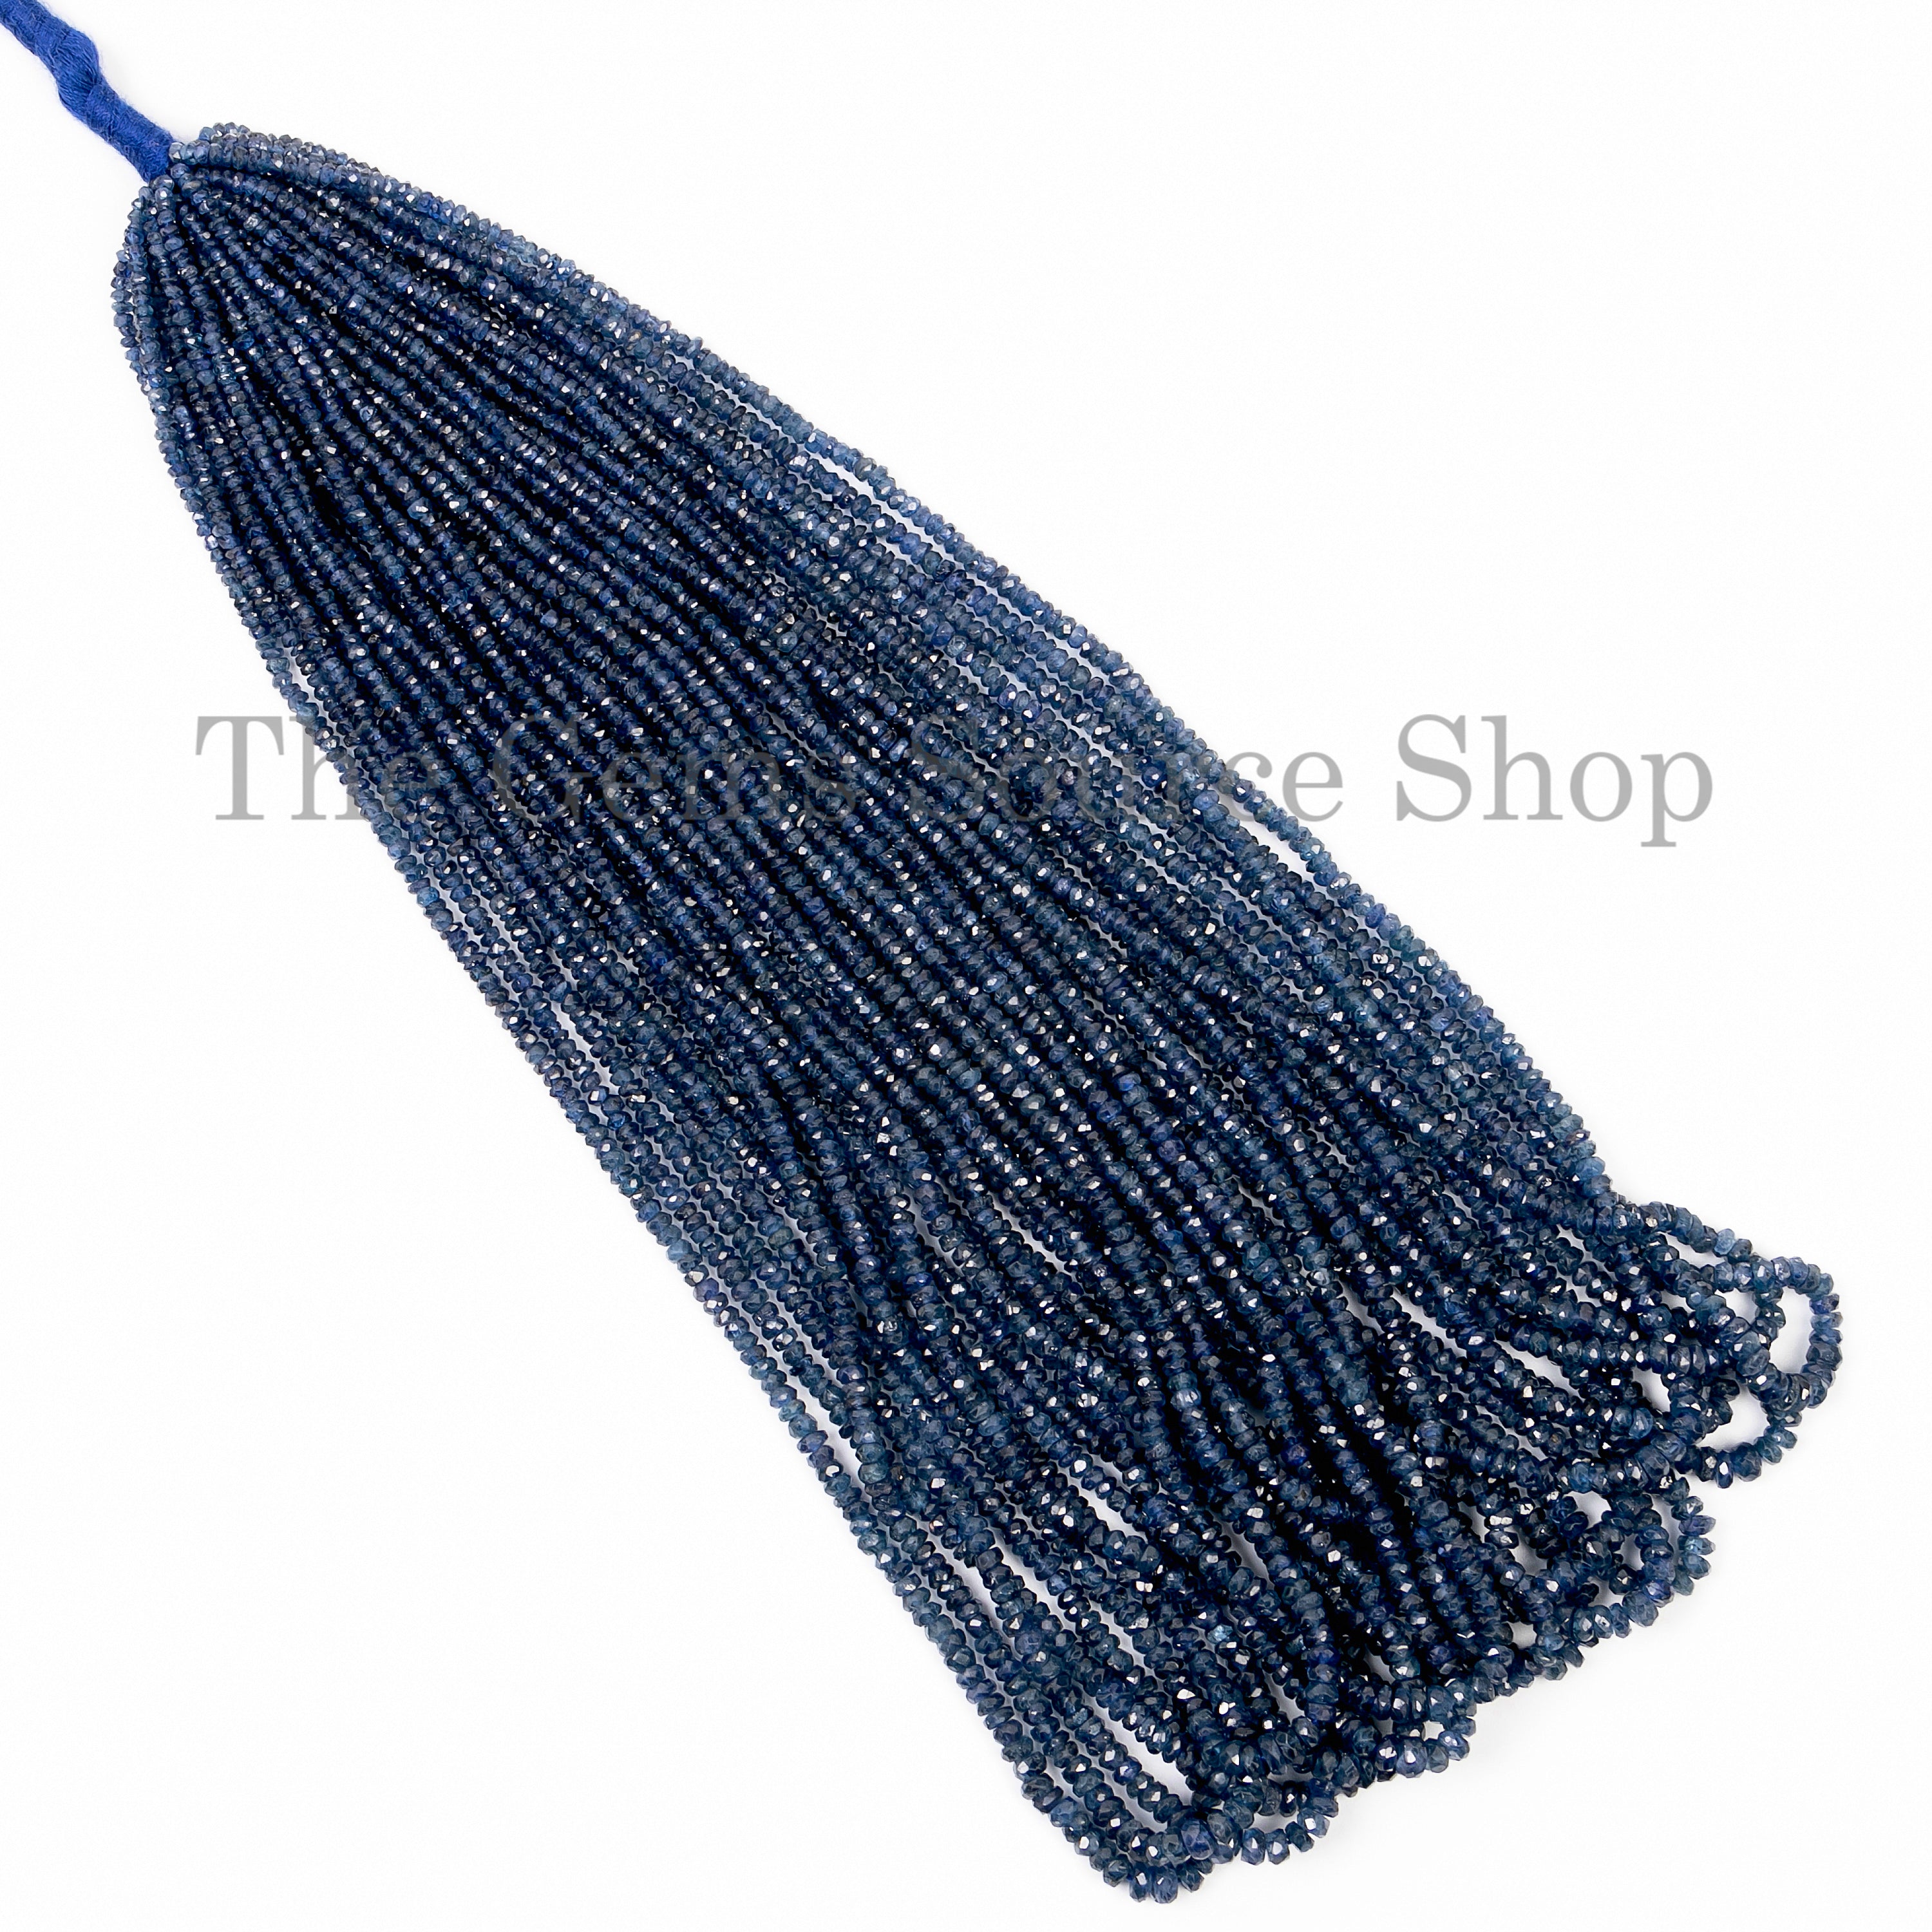 Heishi Blue Sapphire Faceted Rondelle Beads, Loose Sapphire Gemstone TGS-5032